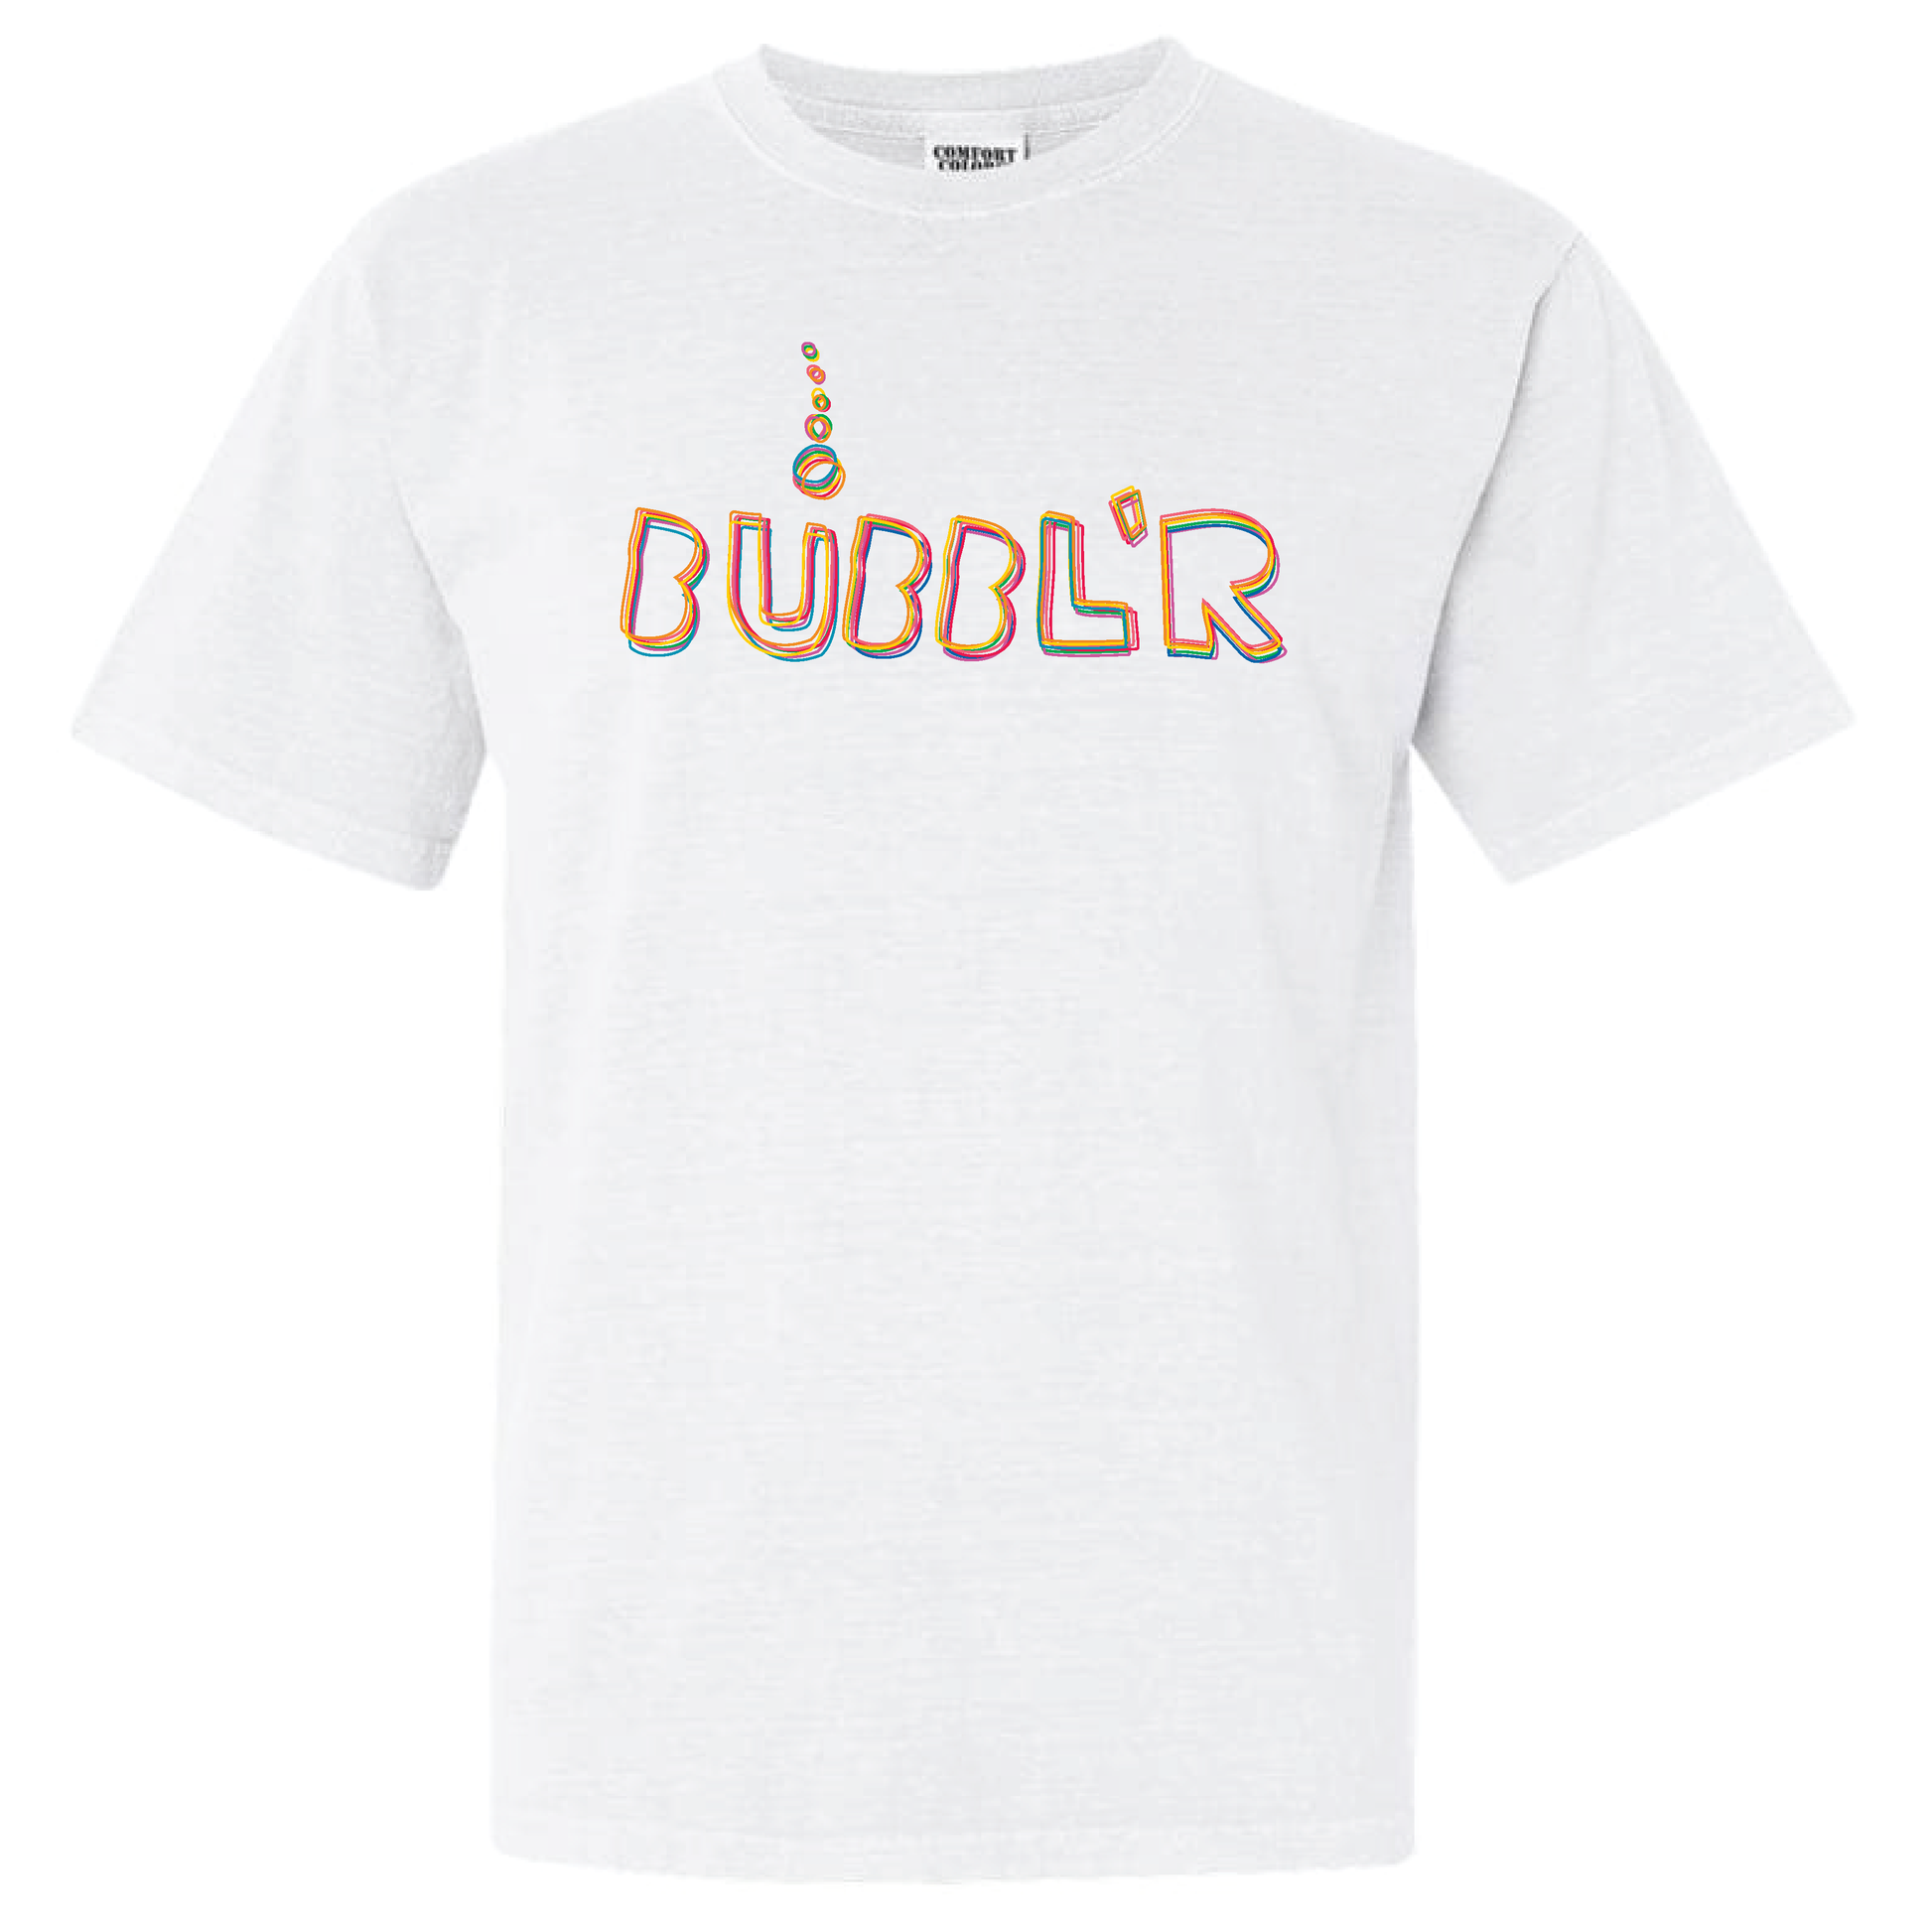 BUBBL'R scribbl'r tee - white – drinkbubbl'rstore